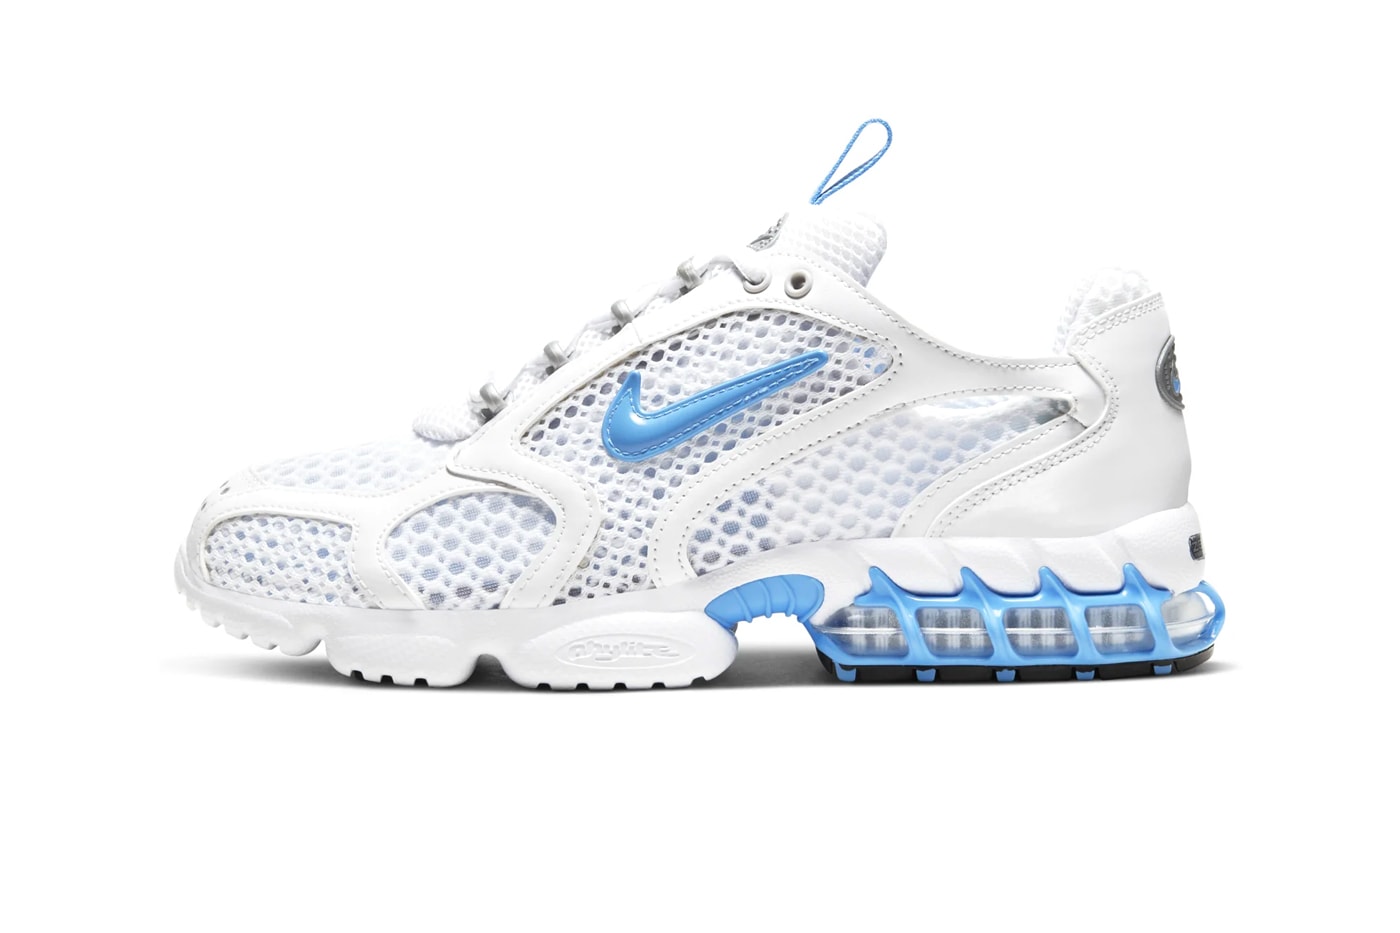 Nike Air Zoom Spiridon Cage 2 "University Blue" Release Stussy Caged Air Sneakers 1990s '90s Retro trainers shoes kicks footwear 